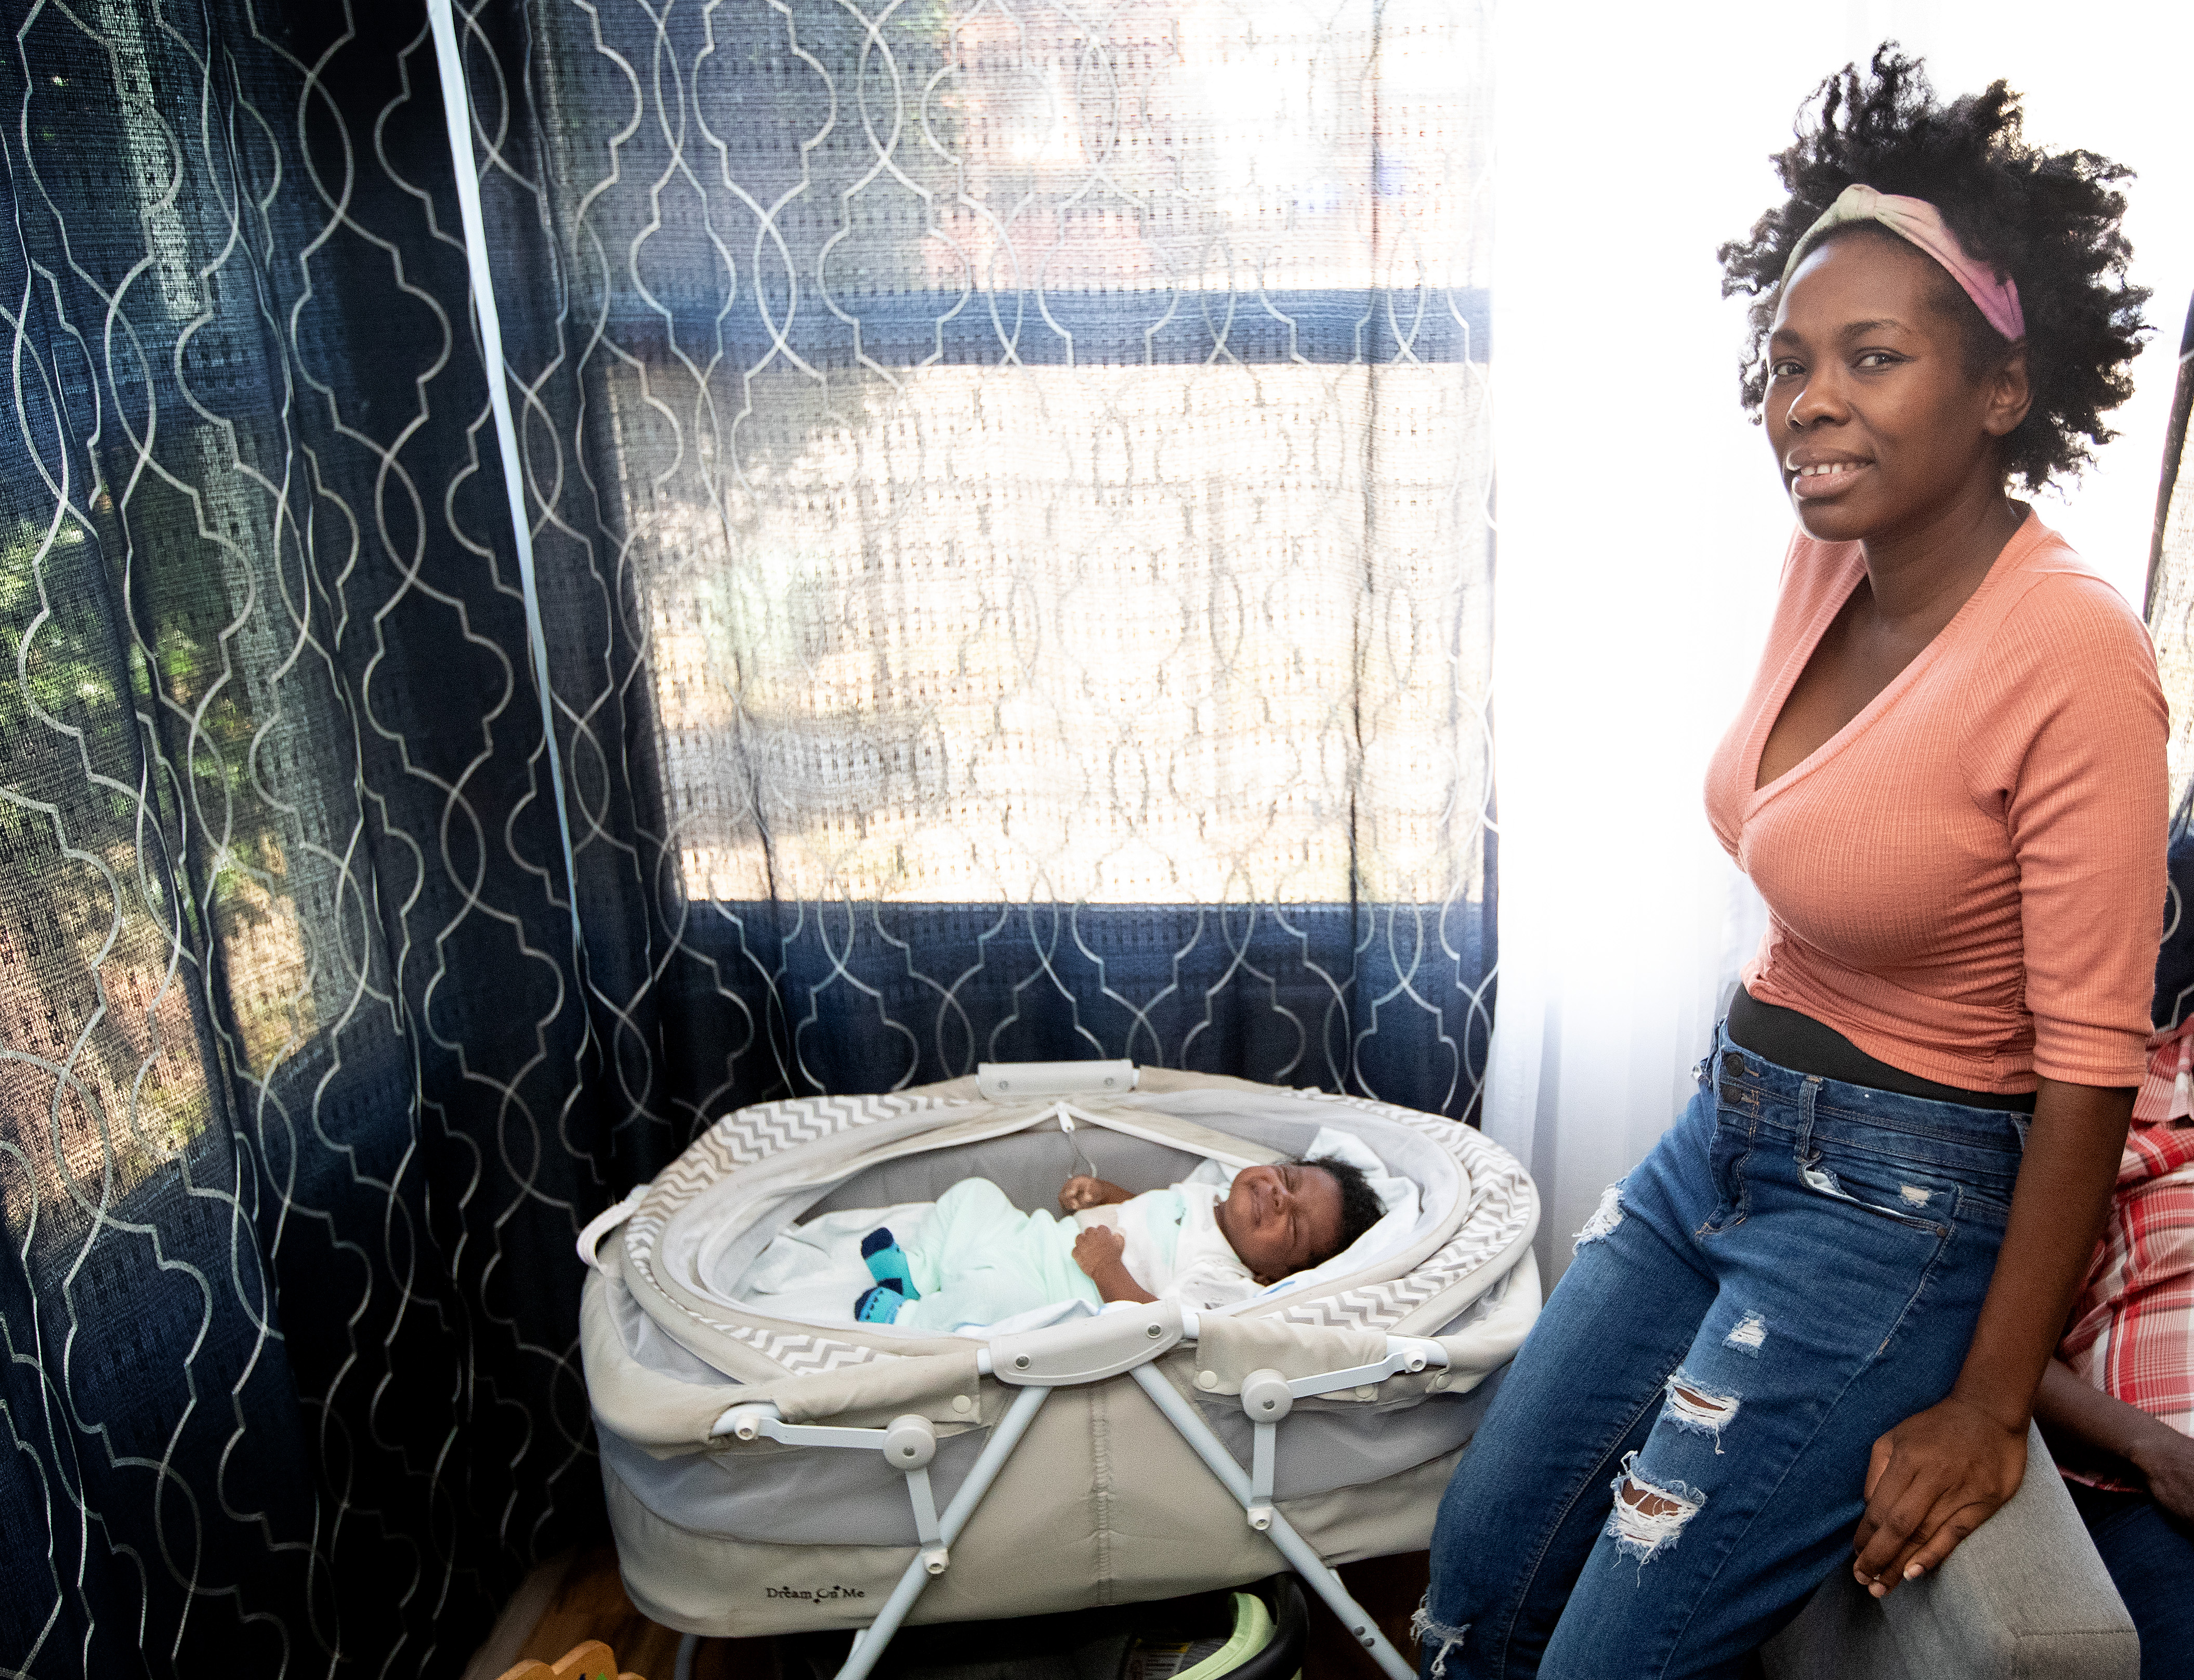 Haitian migrant Margarete Valcin and her son Dylan Barbot Valcin take refuge at Christ United Methodist Ministry Center in San Diego, California. Photo by Mike DuBose, UM News.